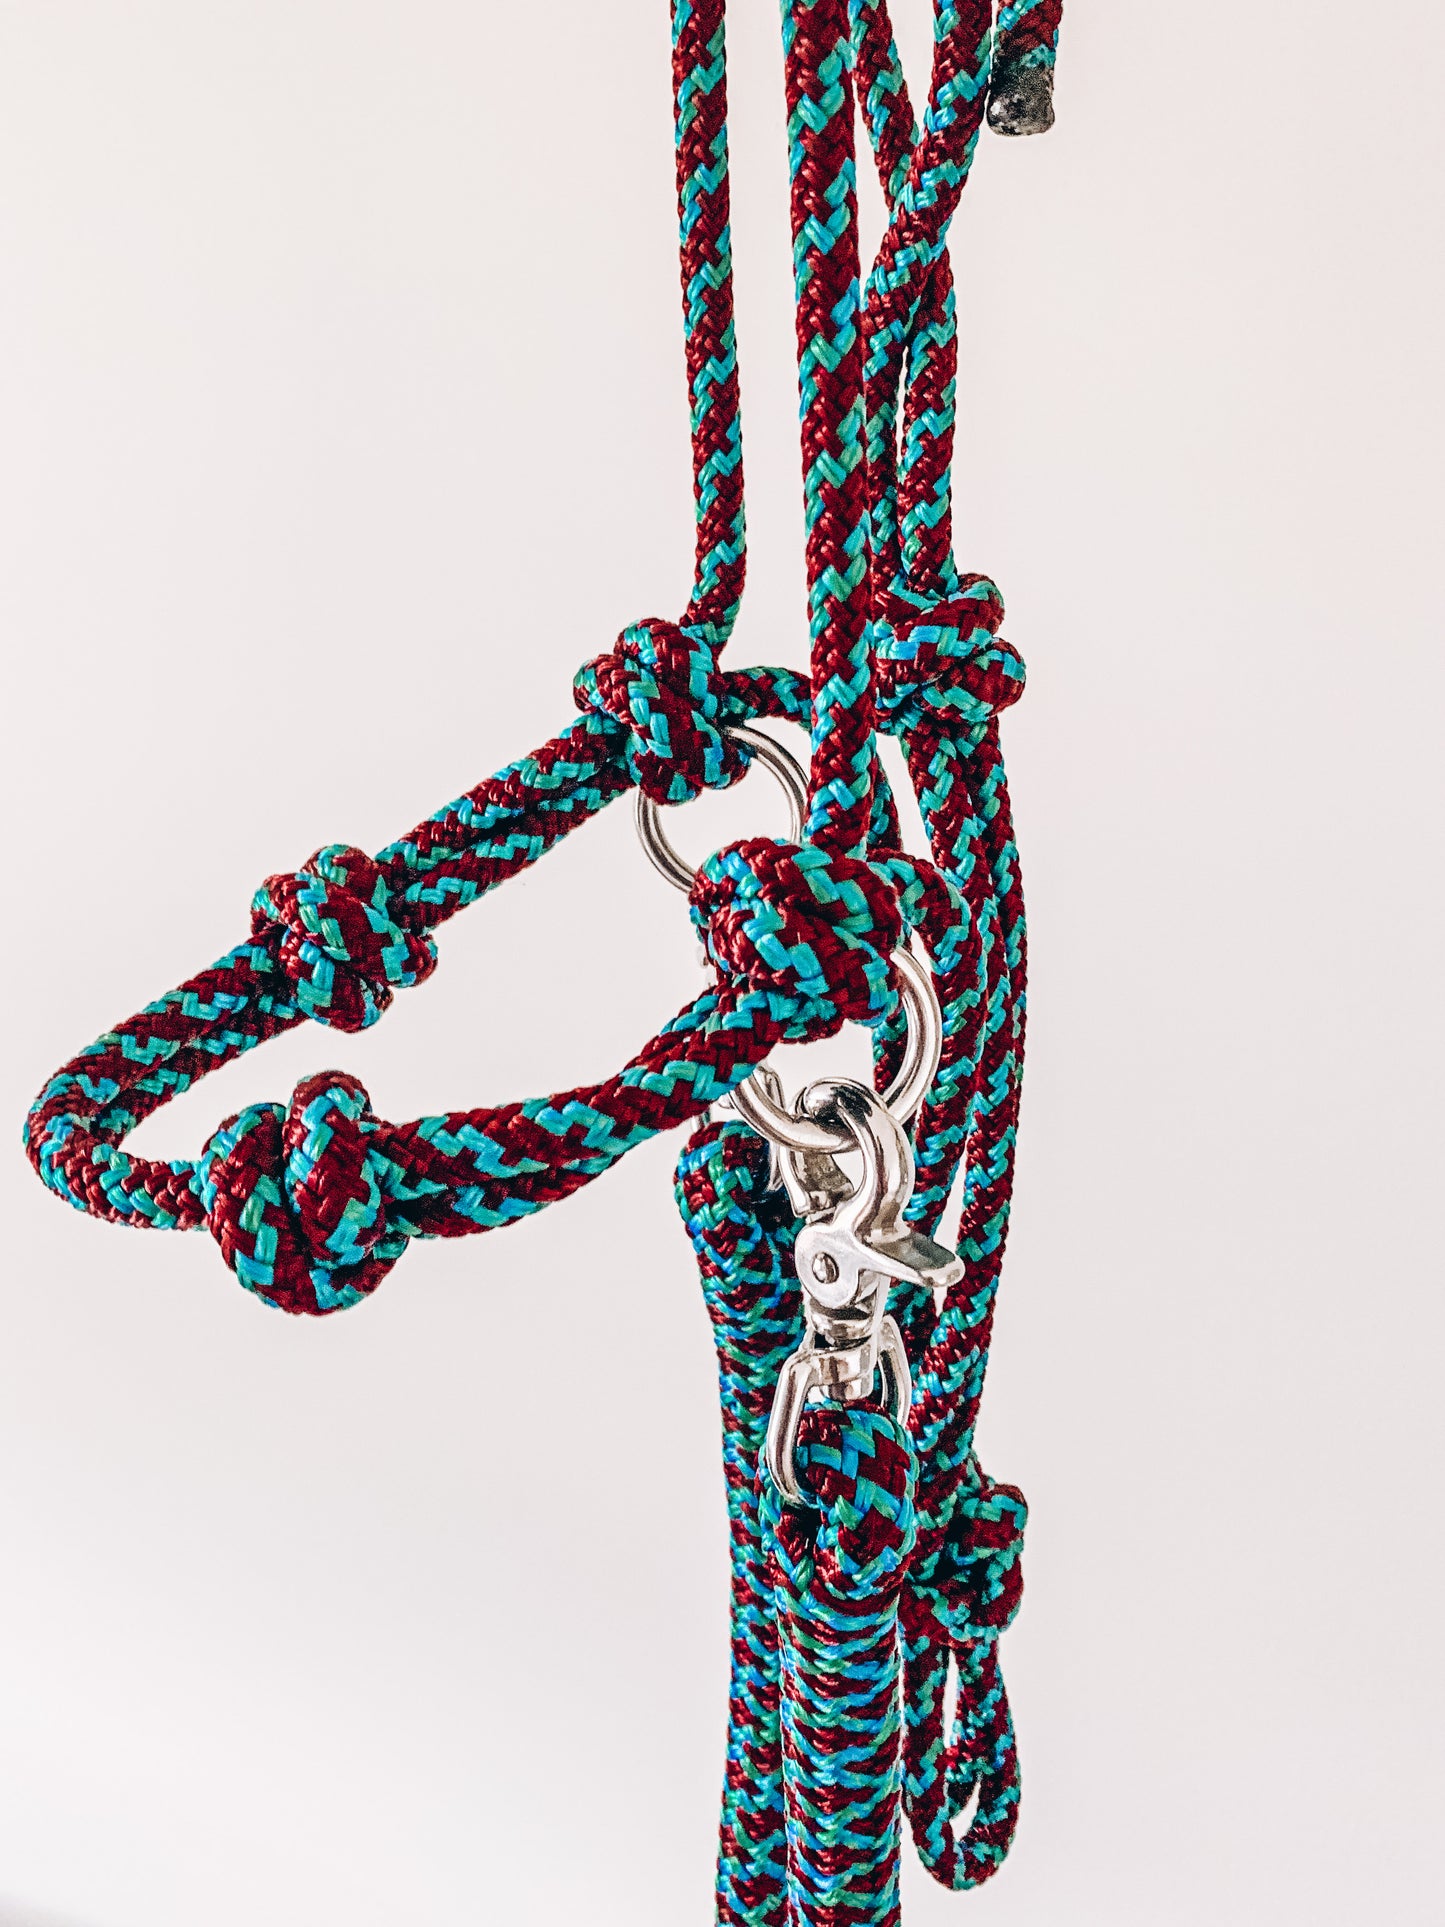 4 Knot Sidepull Halter with rings